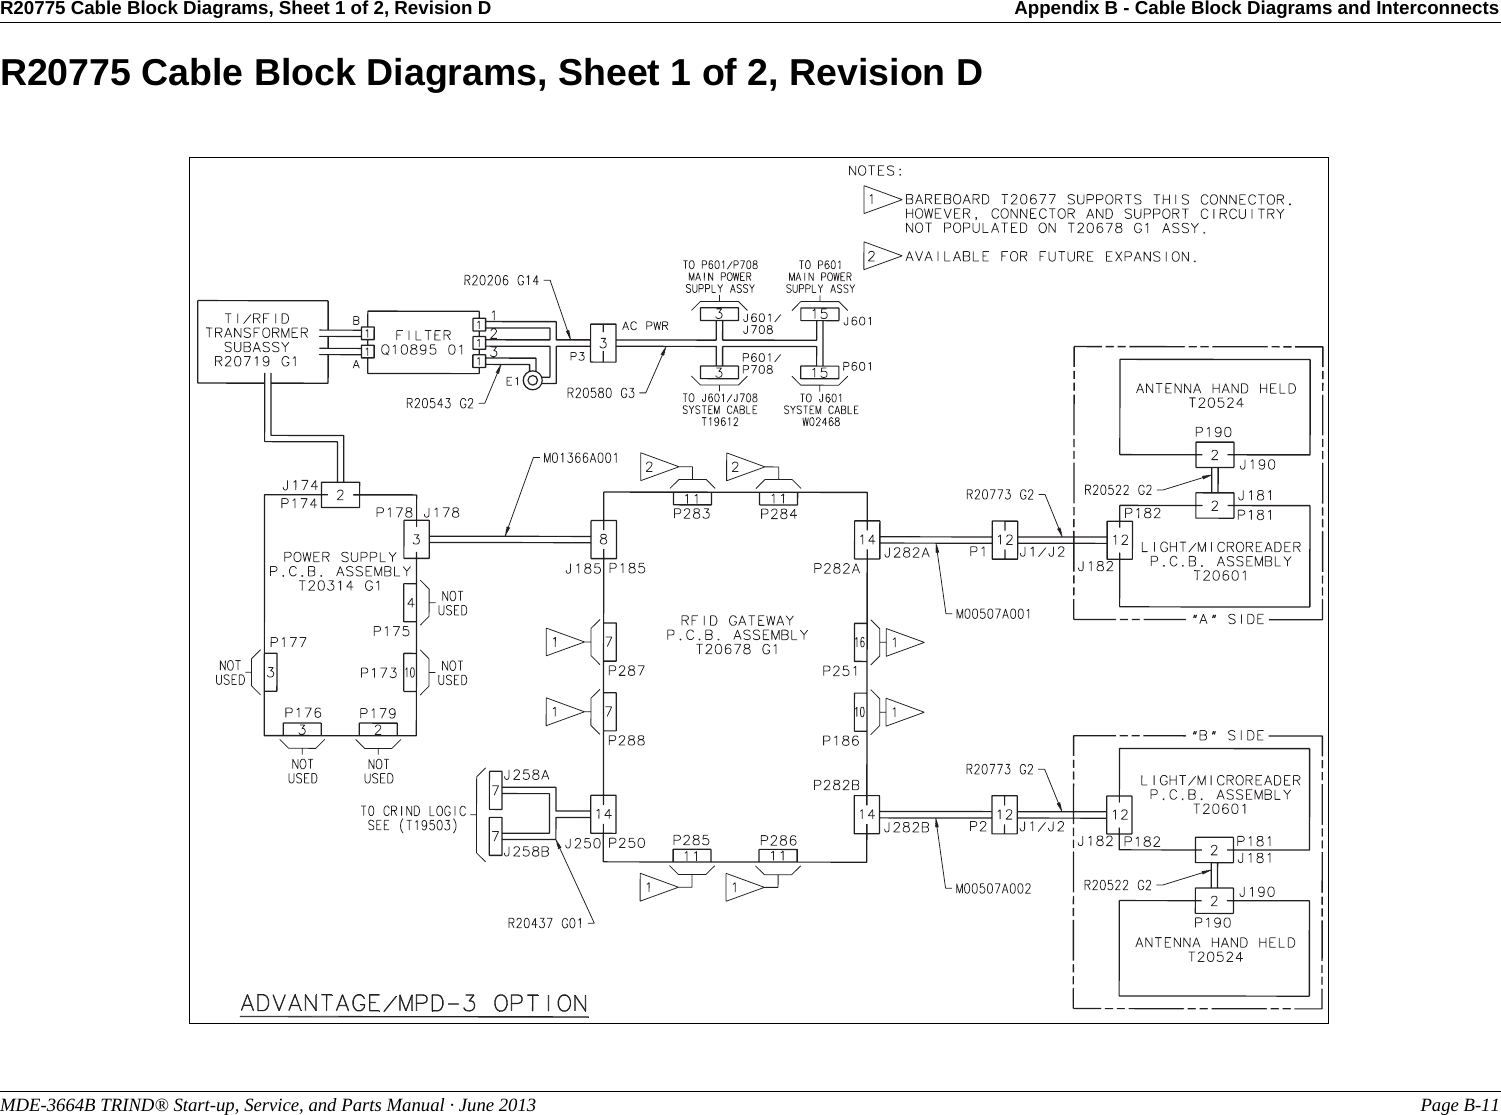 R20775 Cable Block Diagrams, Sheet 1 of 2, Revision D Appendix B - Cable Block Diagrams and InterconnectsMDE-3664B TRIND® Start-up, Service, and Parts Manual · June 2013 Page B-11R20775 Cable Block Diagrams, Sheet 1 of 2, Revision D